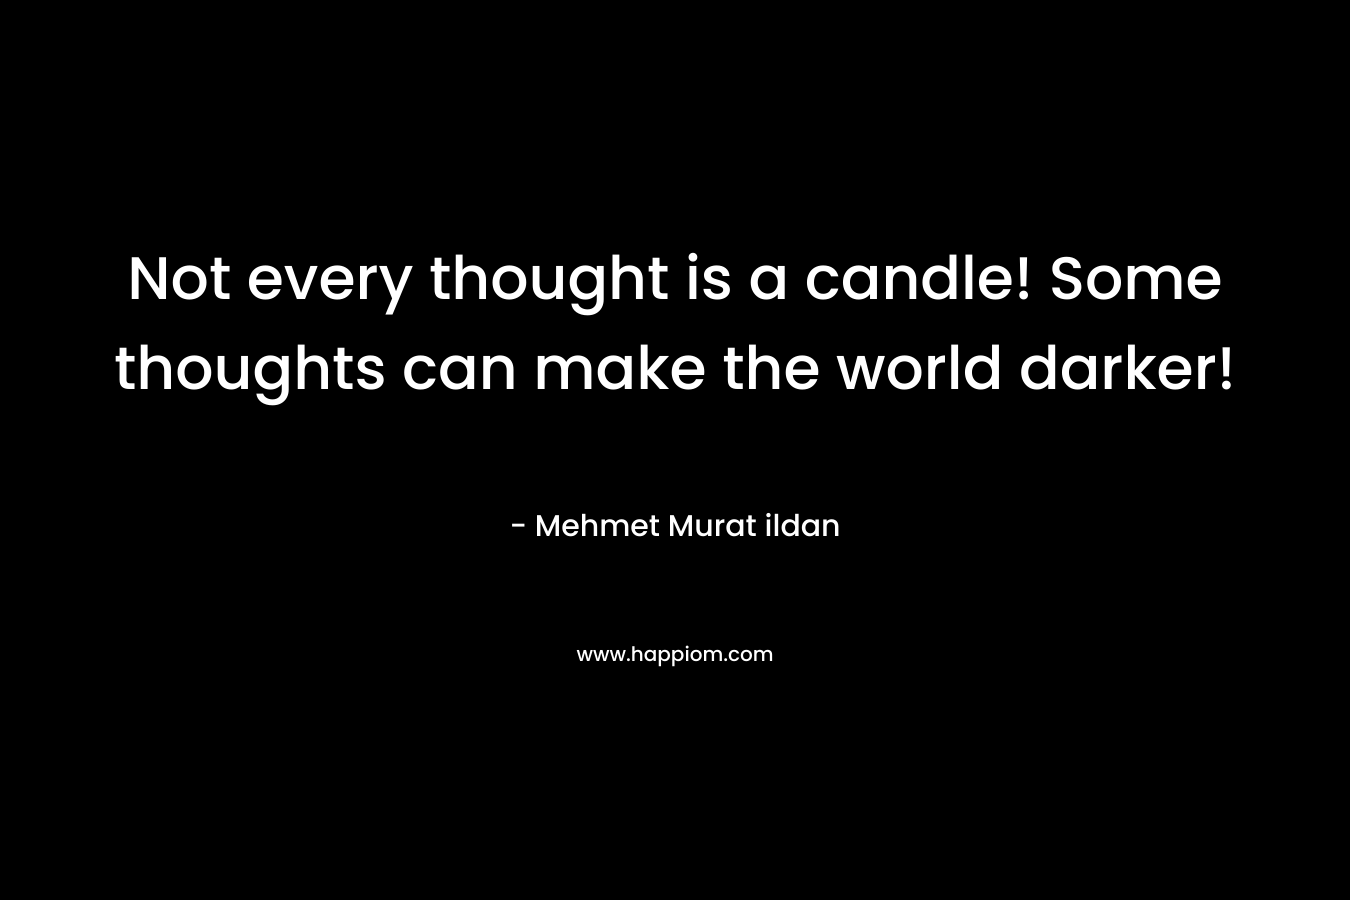 Not every thought is a candle! Some thoughts can make the world darker!